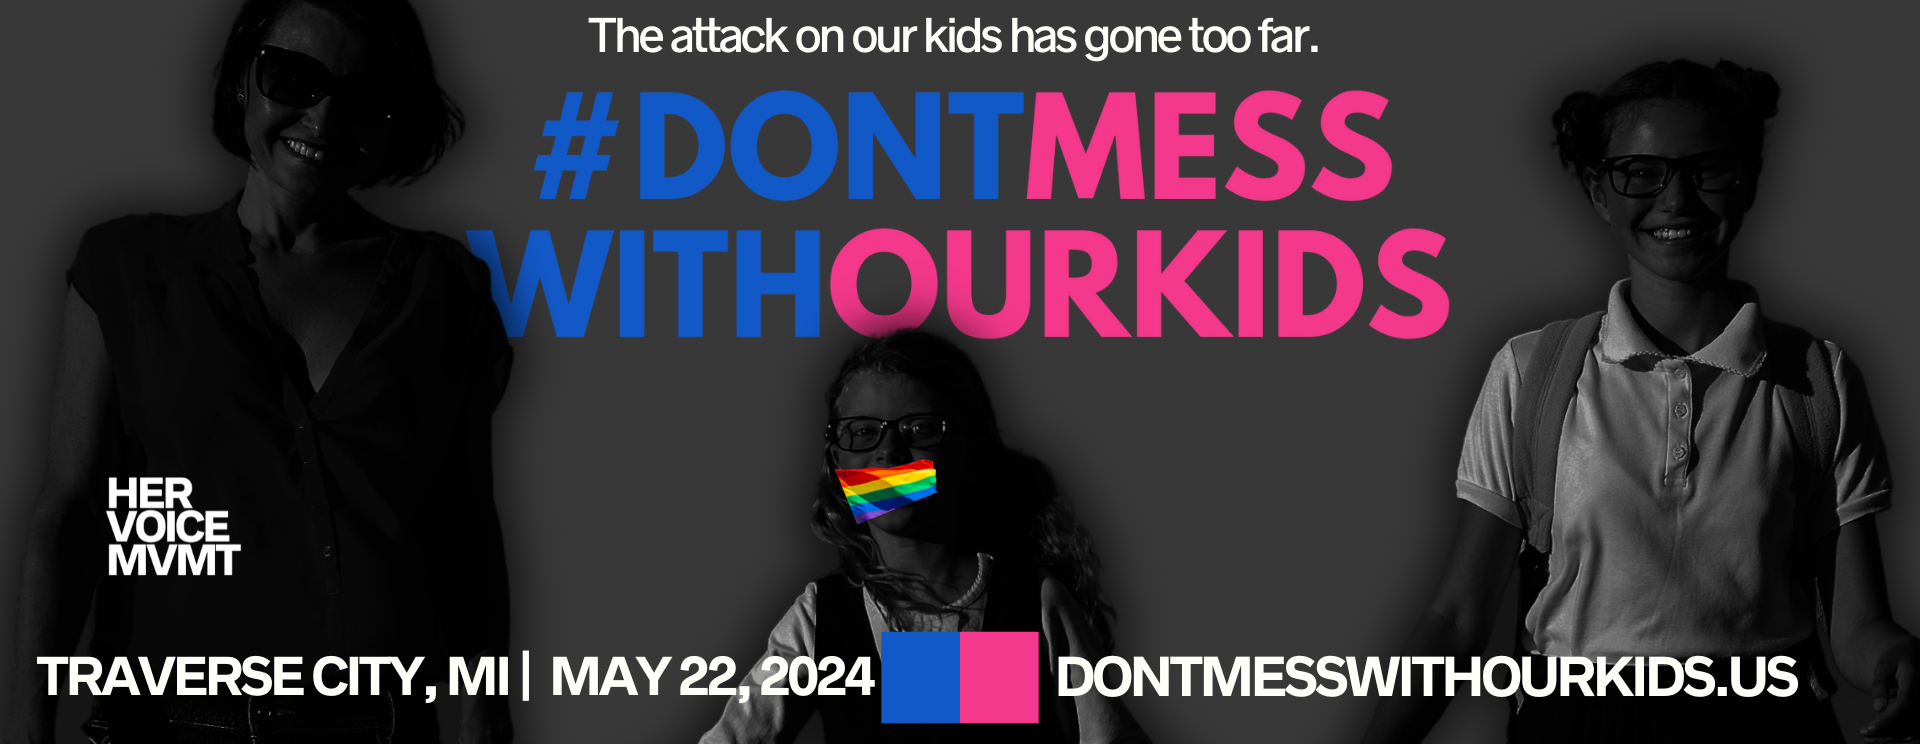 #DontMessWithOurKids Vision Meeting - Traverse City, MI (05/22/2024)